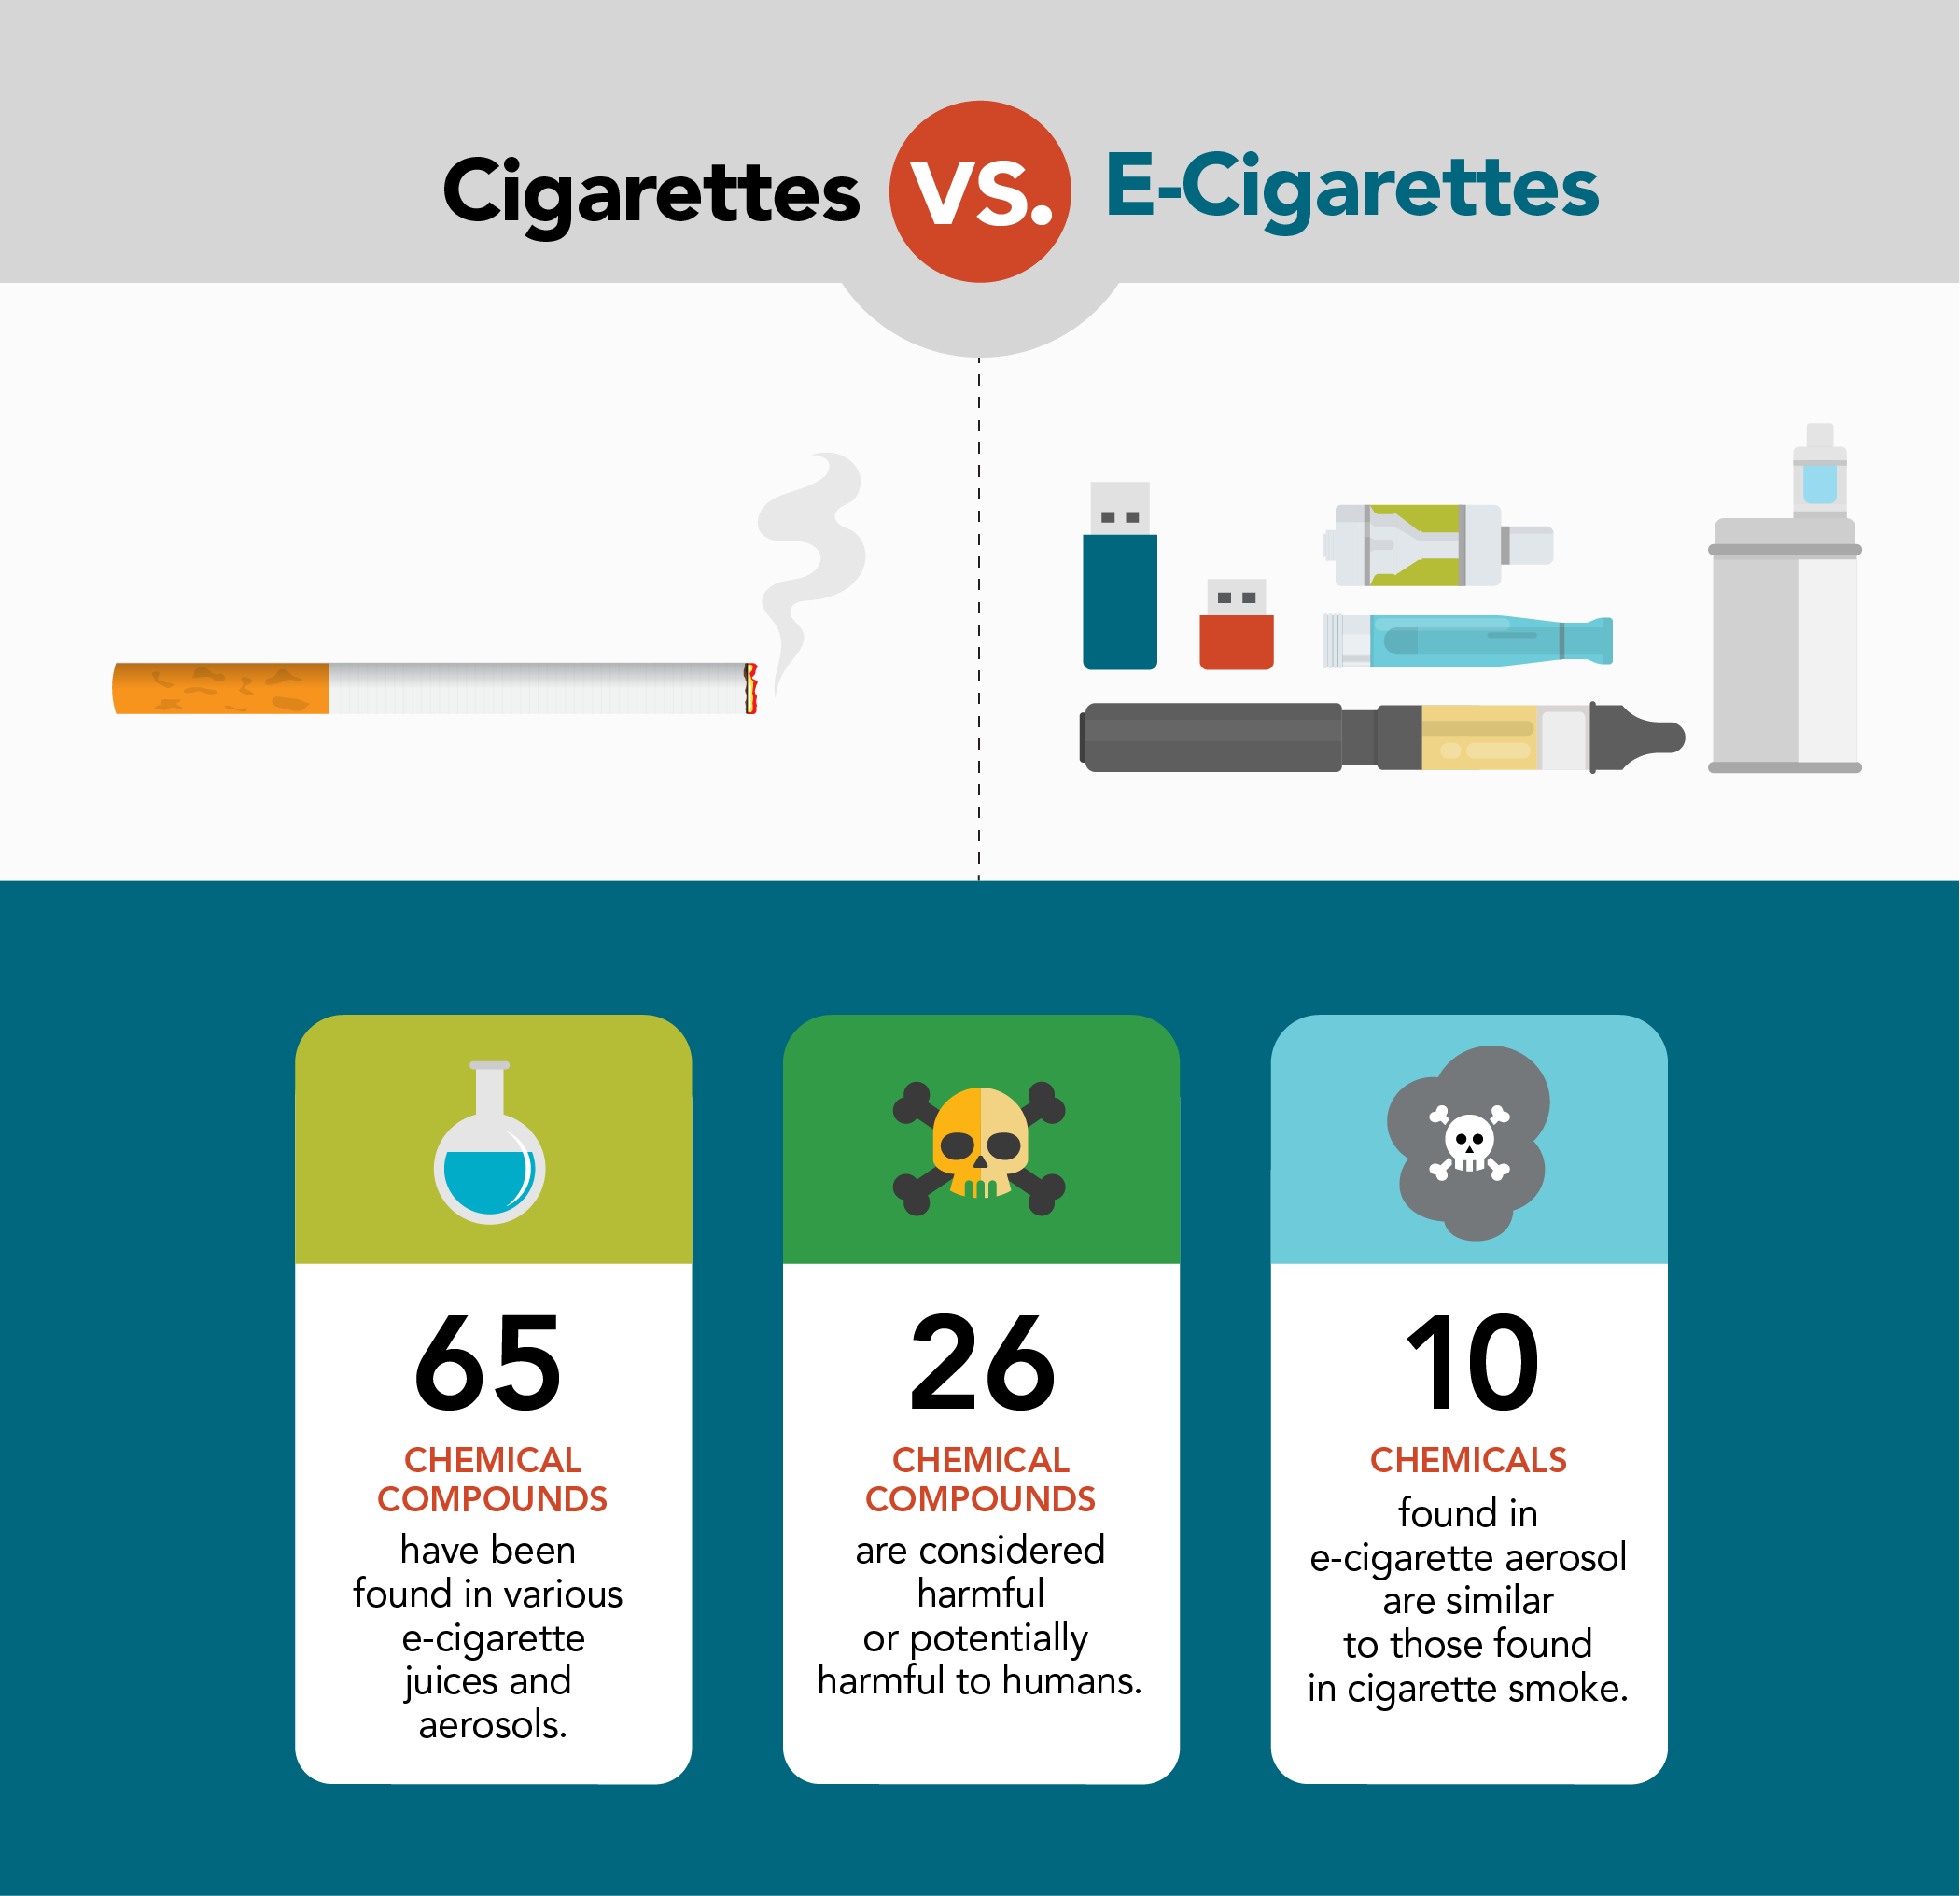 A chart comparing cigarettes to e-cigarettes. 65 chemical compounds have been found in various e-cigarette juices and aerosols. 26 of those chemical compunds found are considered harmful or potentially harmful to your health. 10 chemicals found in e-cig aerosol are similar to those found in cigarette smoke.